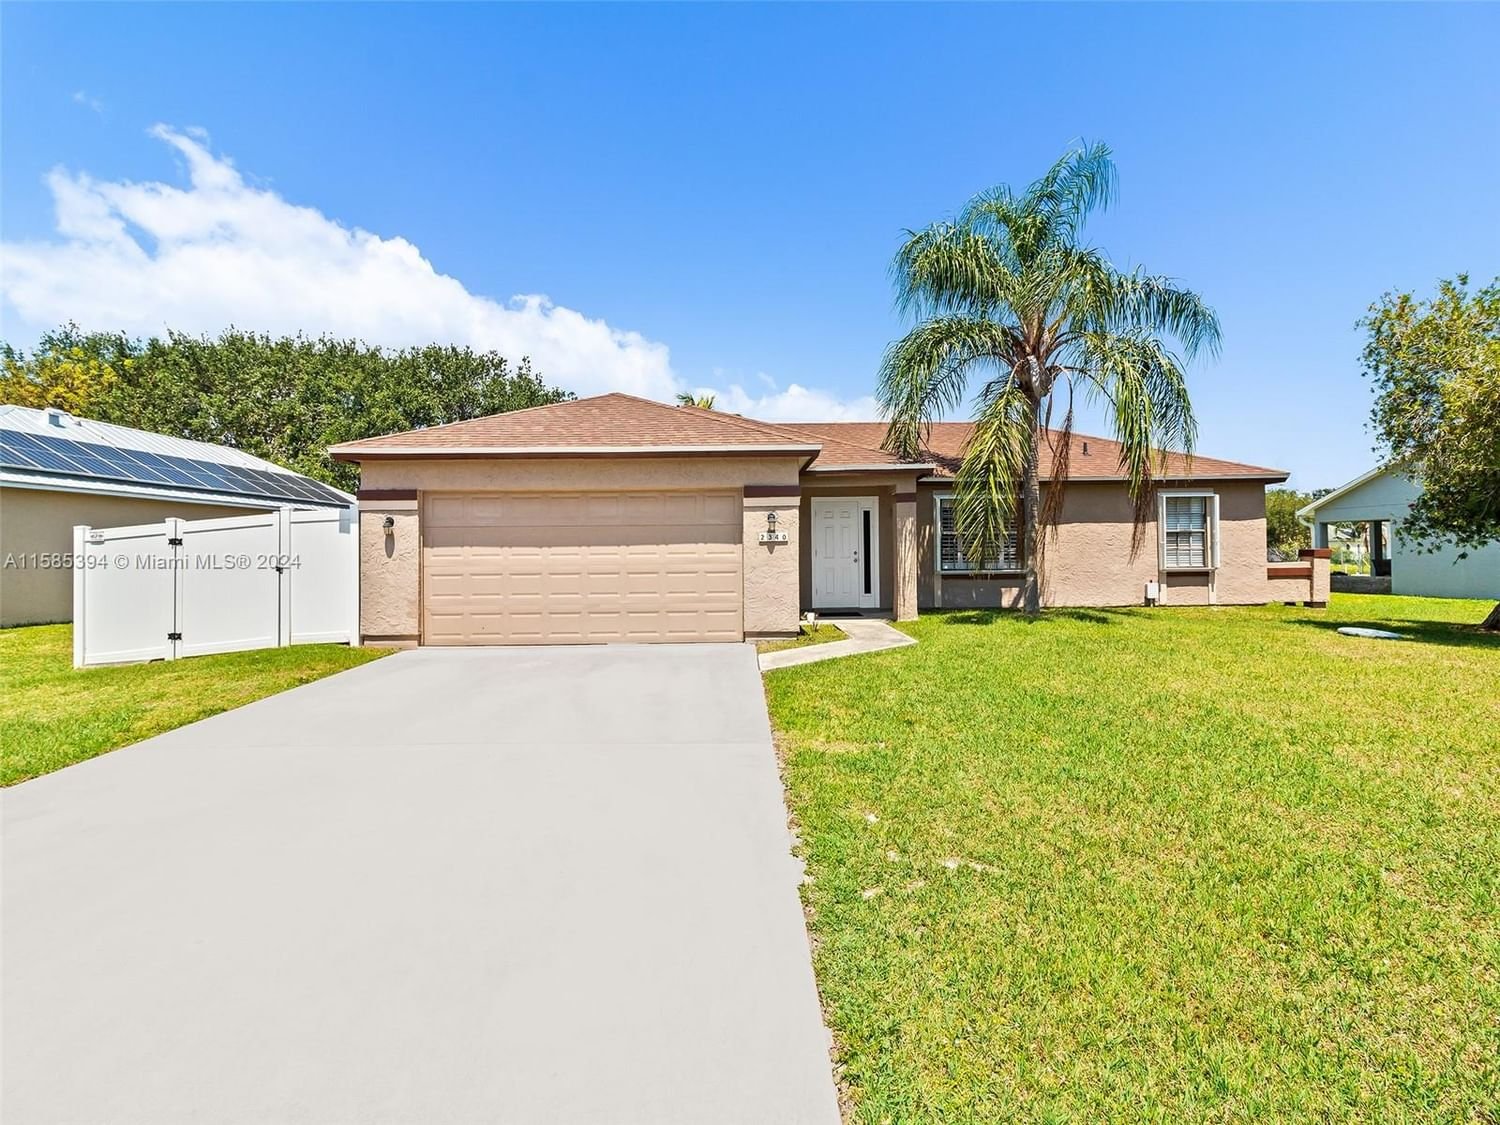 Real estate property located at 2340 Charleston Dr, St Lucie County, PORT ST LUCIE SECTION 40, Port St. Lucie, FL